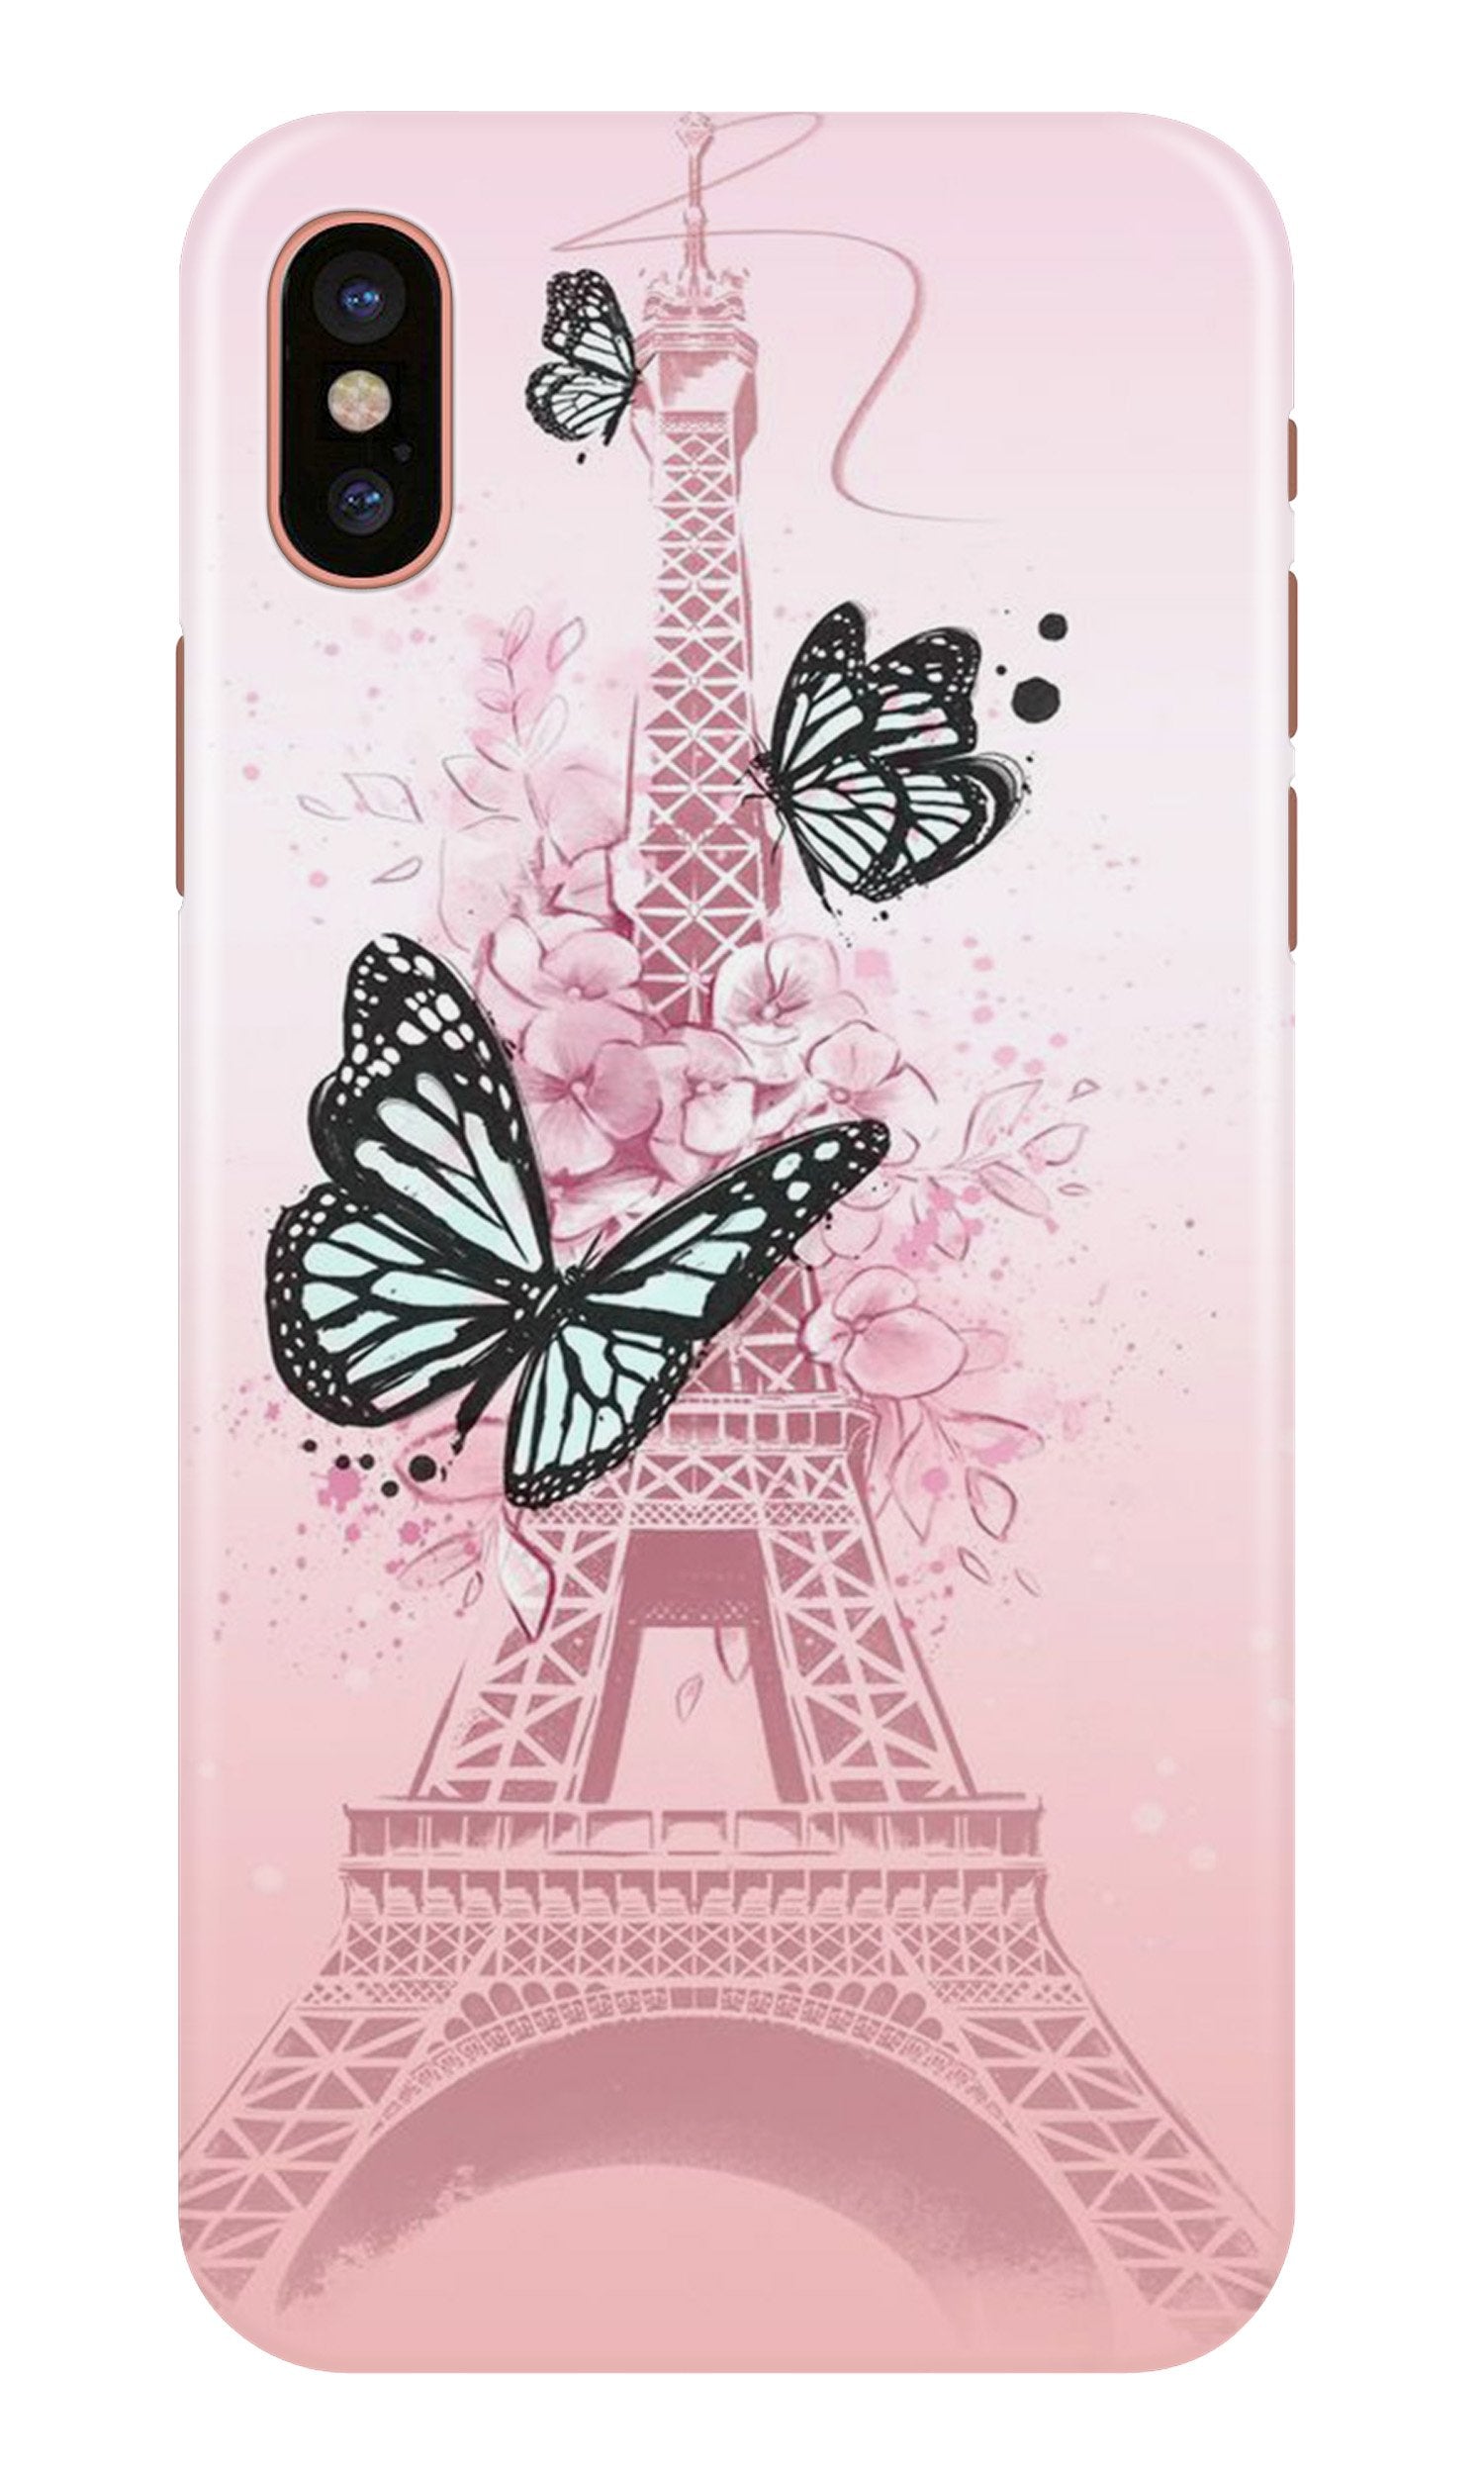 Eiffel Tower Case for iPhone Xs (Design No. 211)